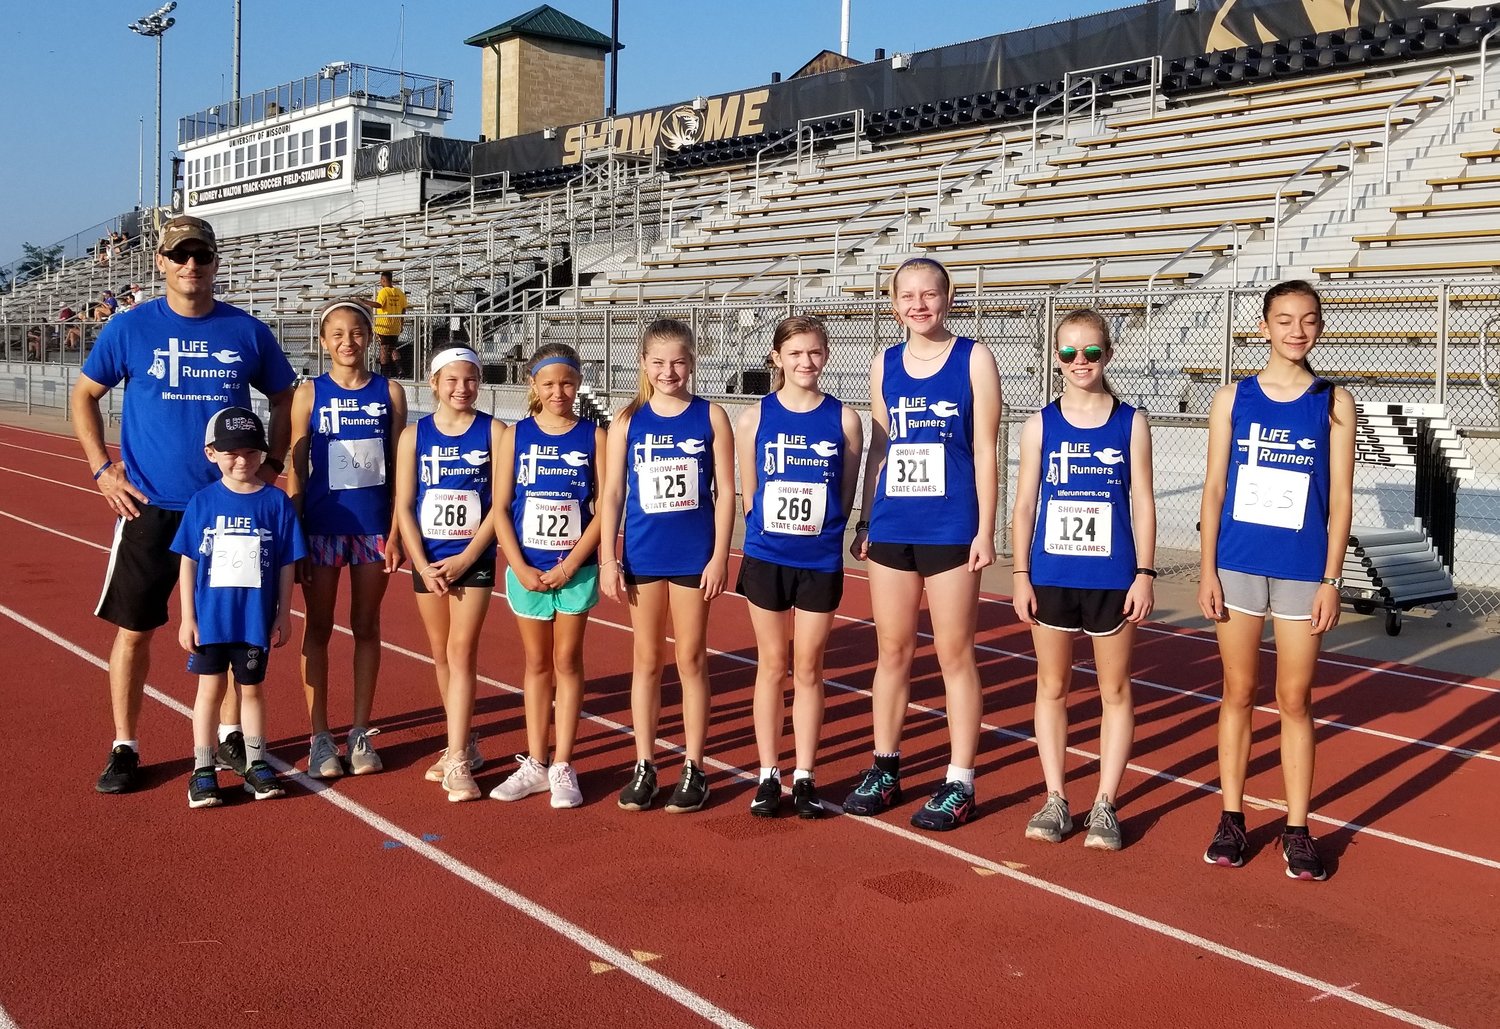 Nine children and four adults who are members of the LIFE Runners team earned 22 track and field medals while proclaiming the sanctity of human life at this year’s Show-Me Games in Columbia, Mo.